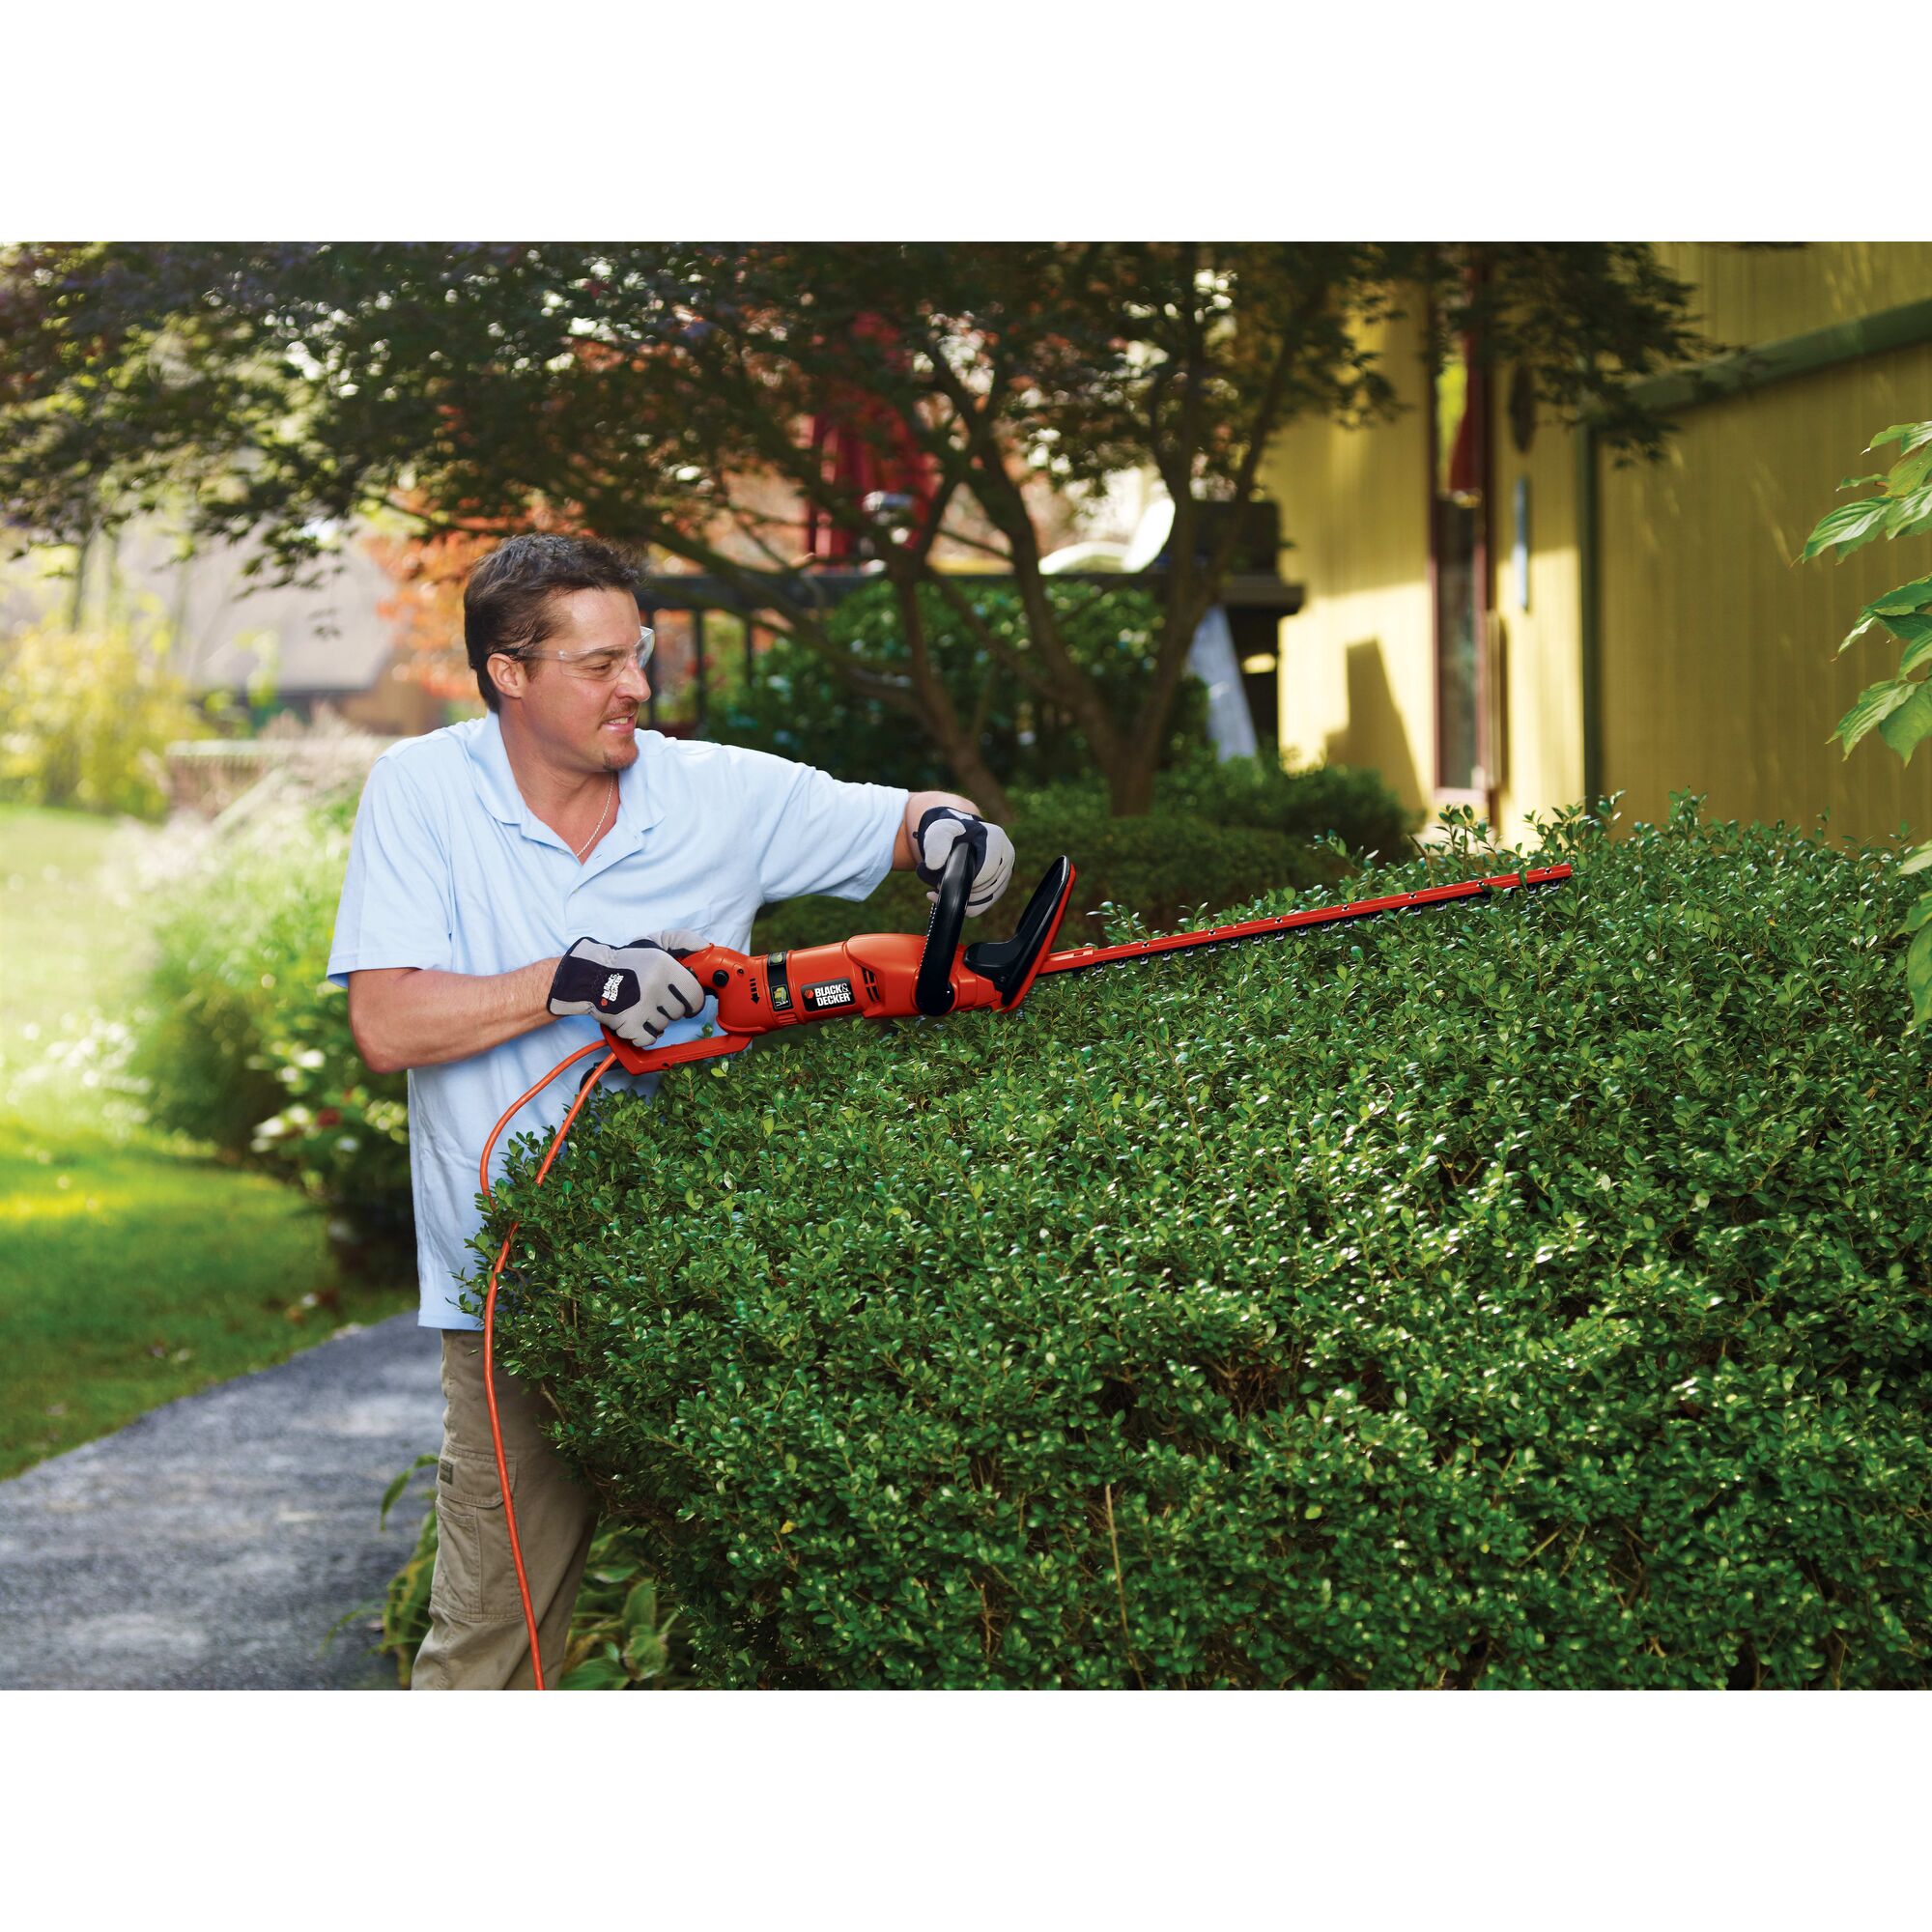 24 inch hedge trimmer with rotating handle being used by a person to trim hedge.